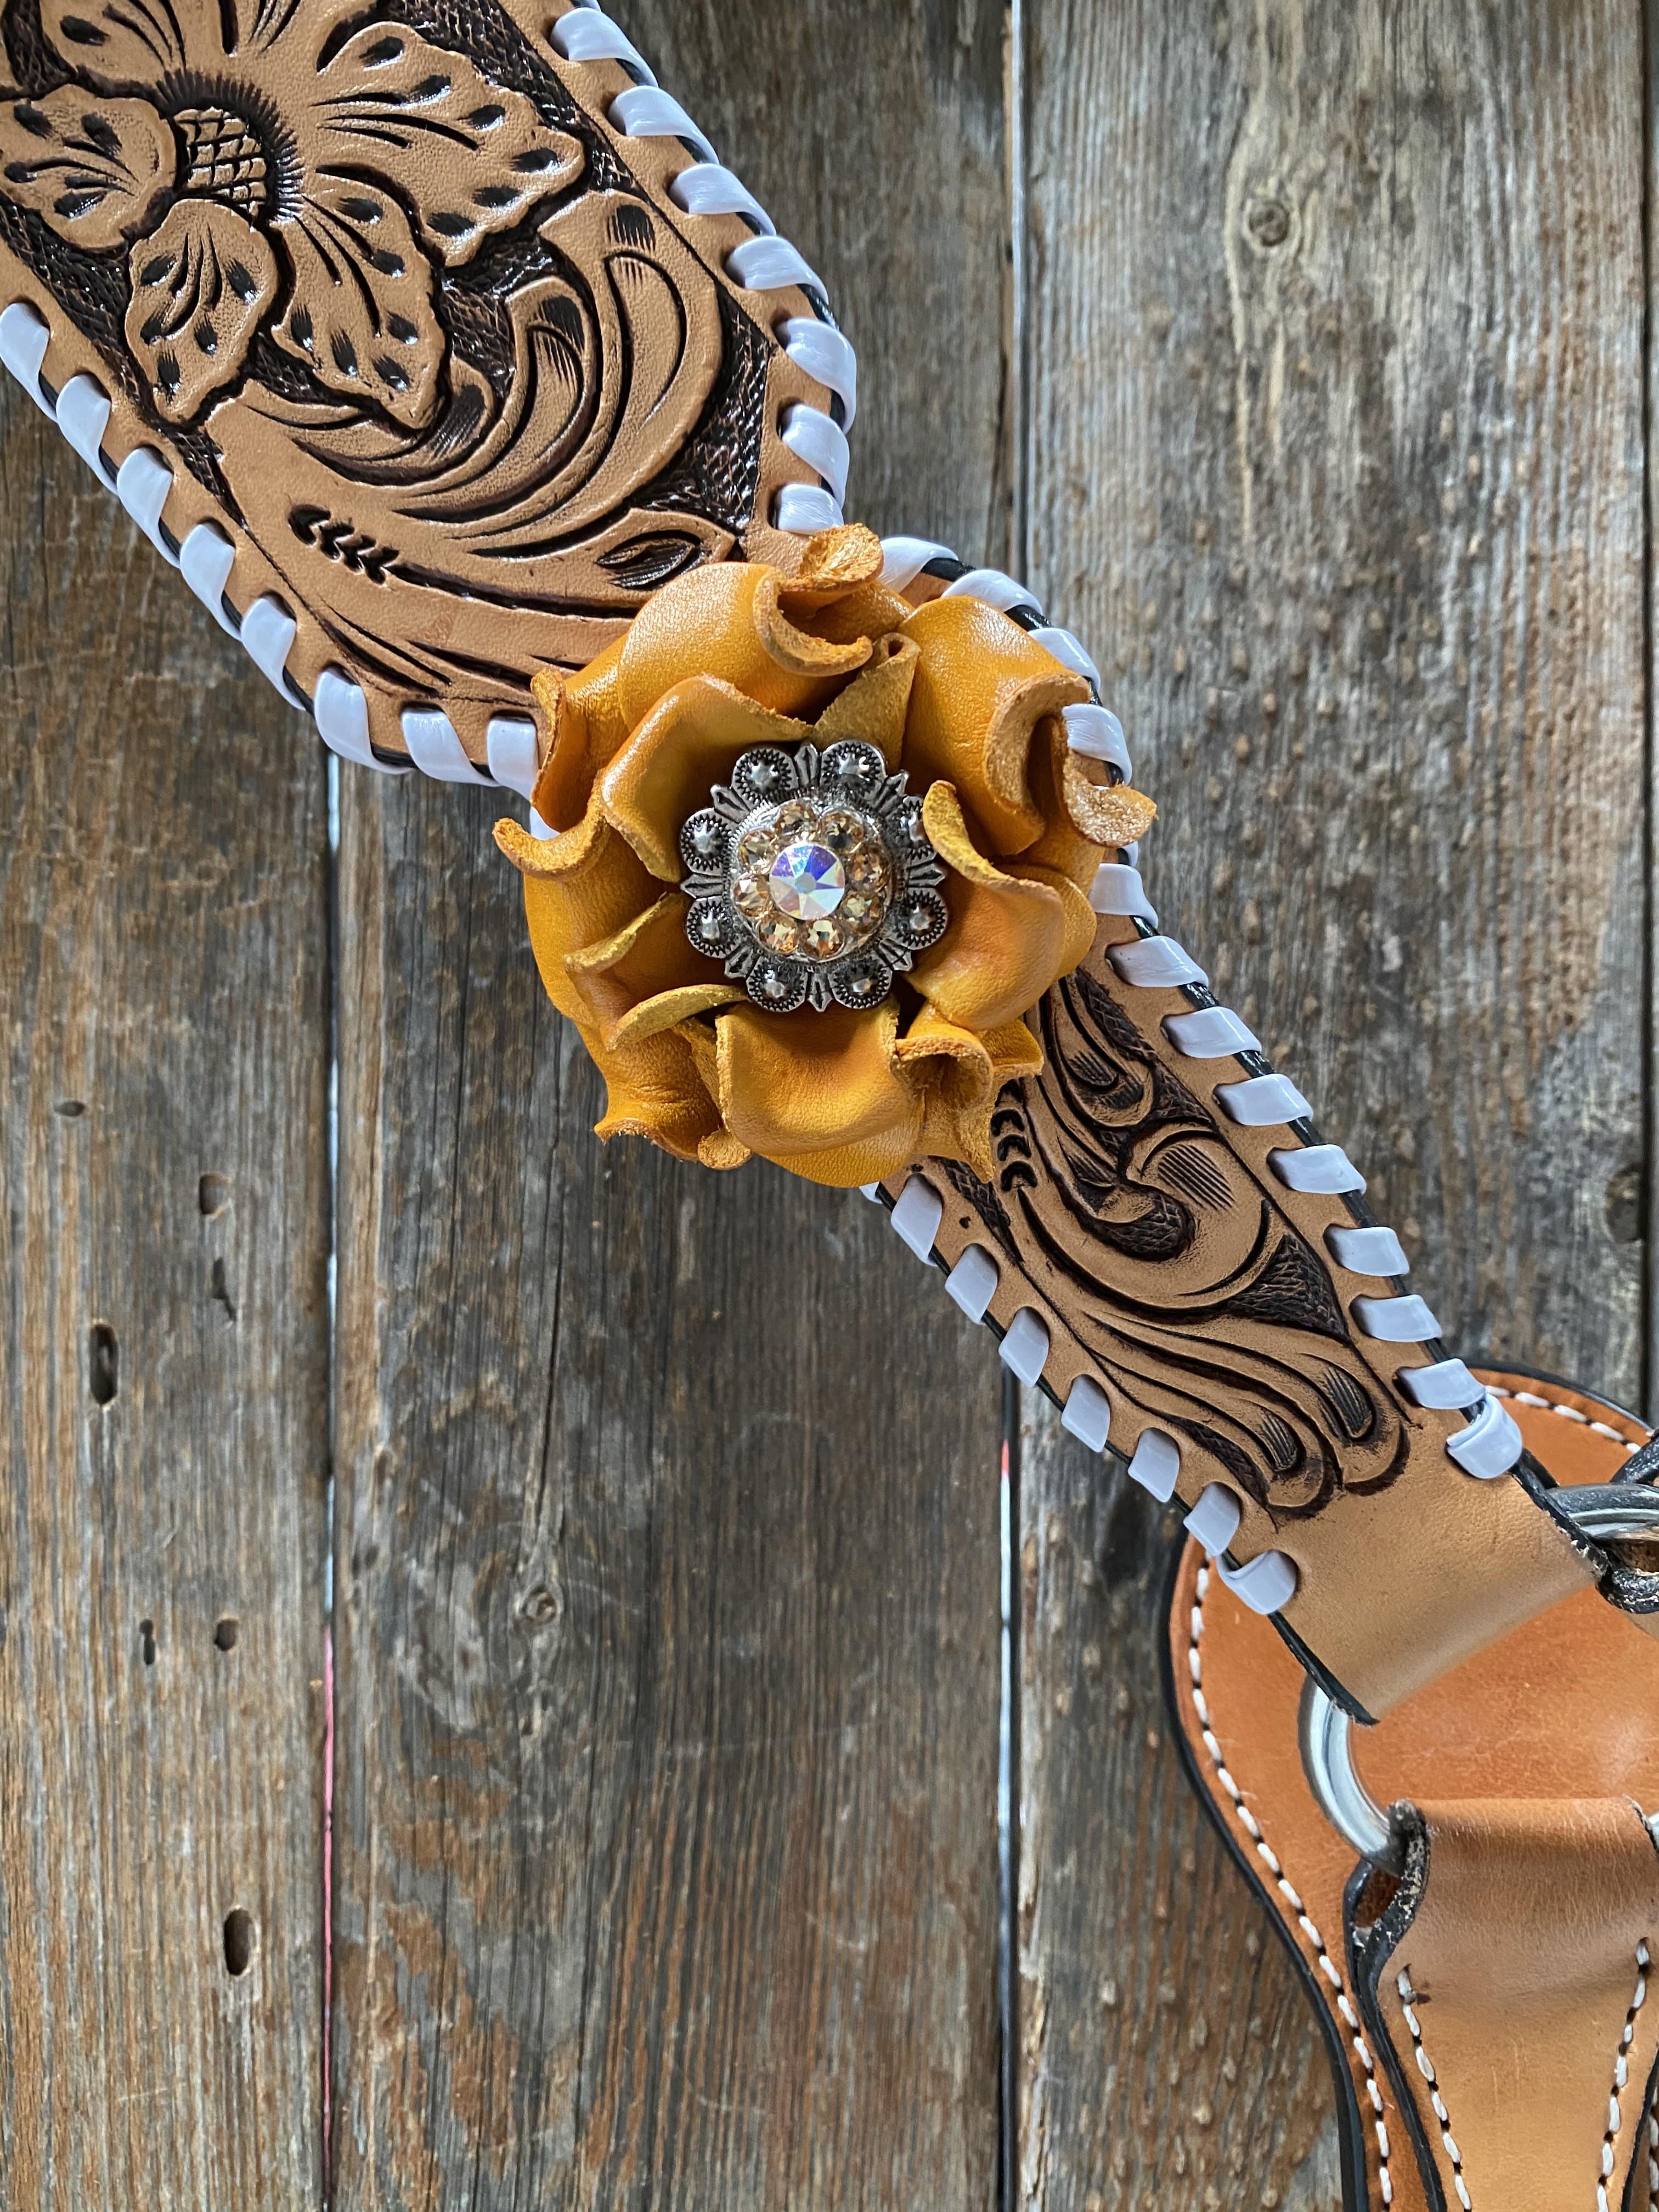 Tack Whipstitch Breastcollar - Yellow Roses & European Conchos #BC286 BC286